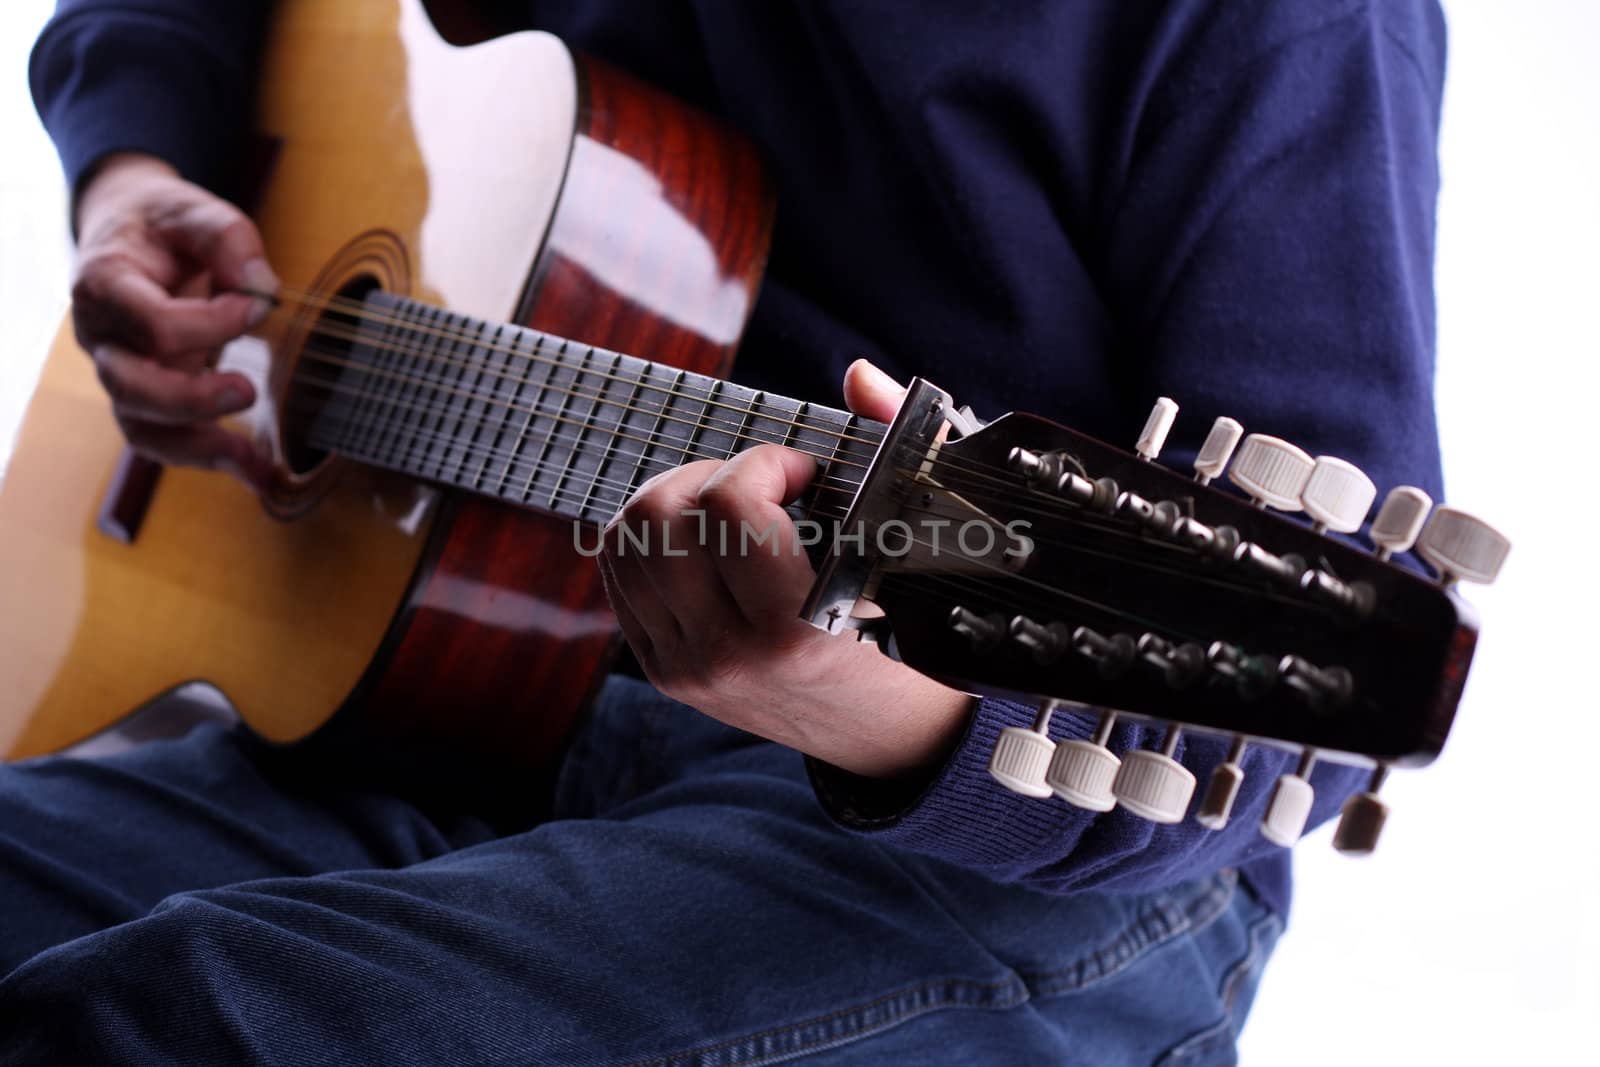 play music with the classic guitar